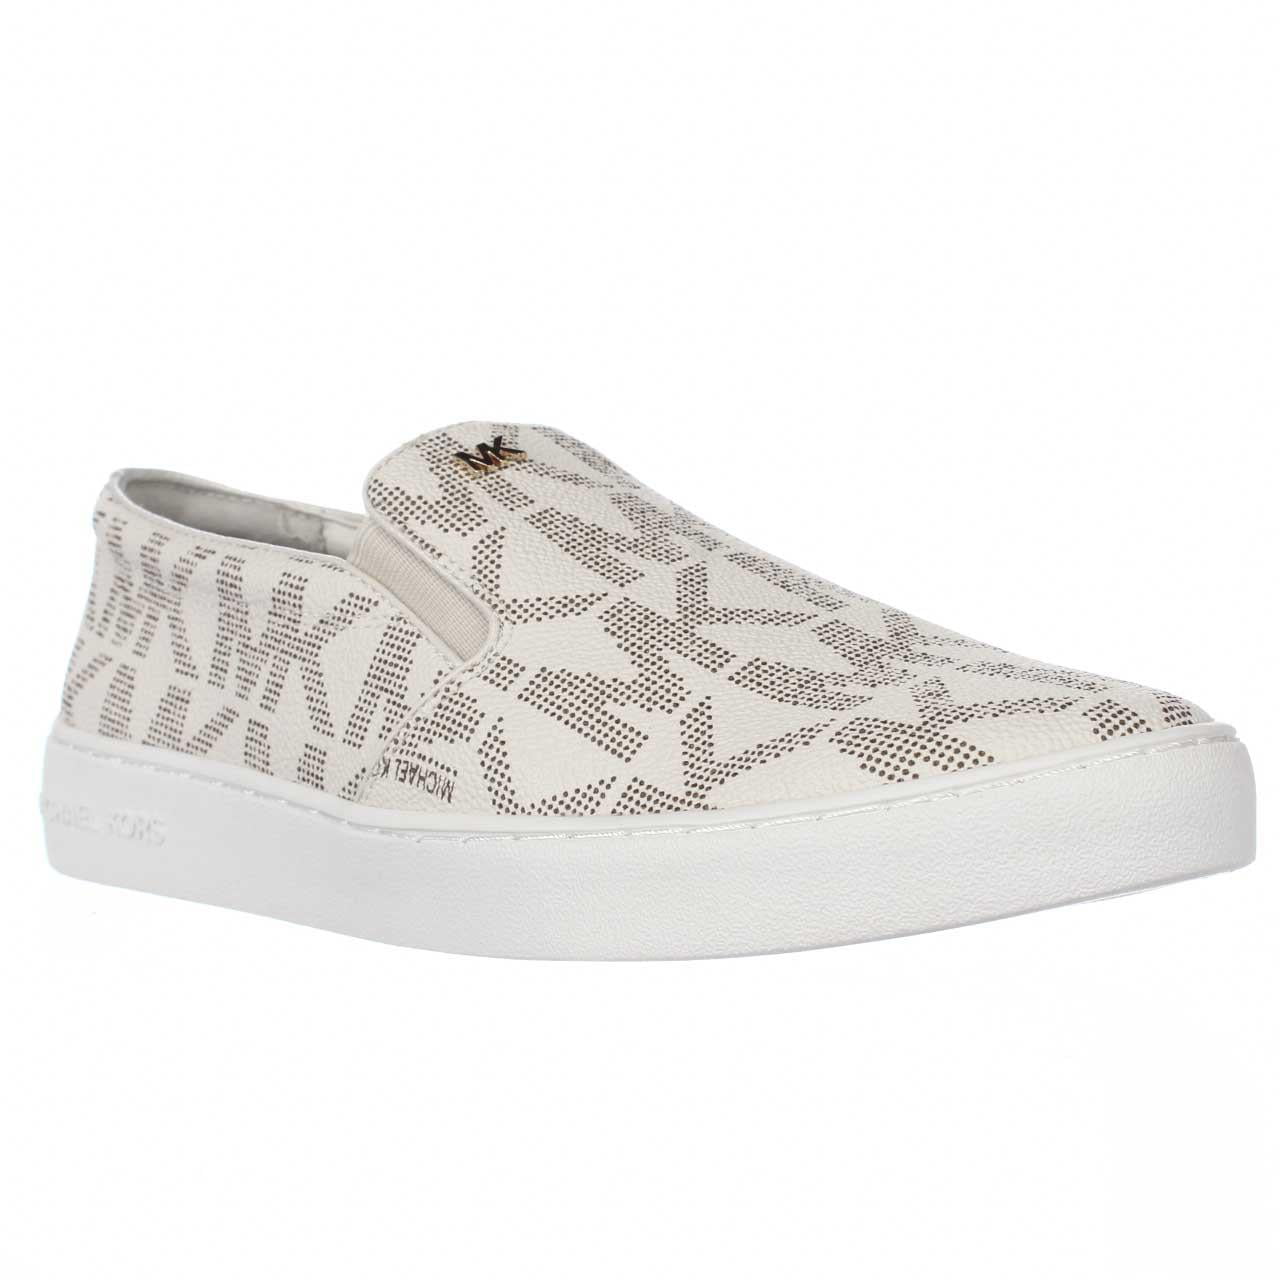 Pre-owned Michael Kors Women's Wilma Trainer Sneakers Shoes Pale Gold Multi  | ModeSens